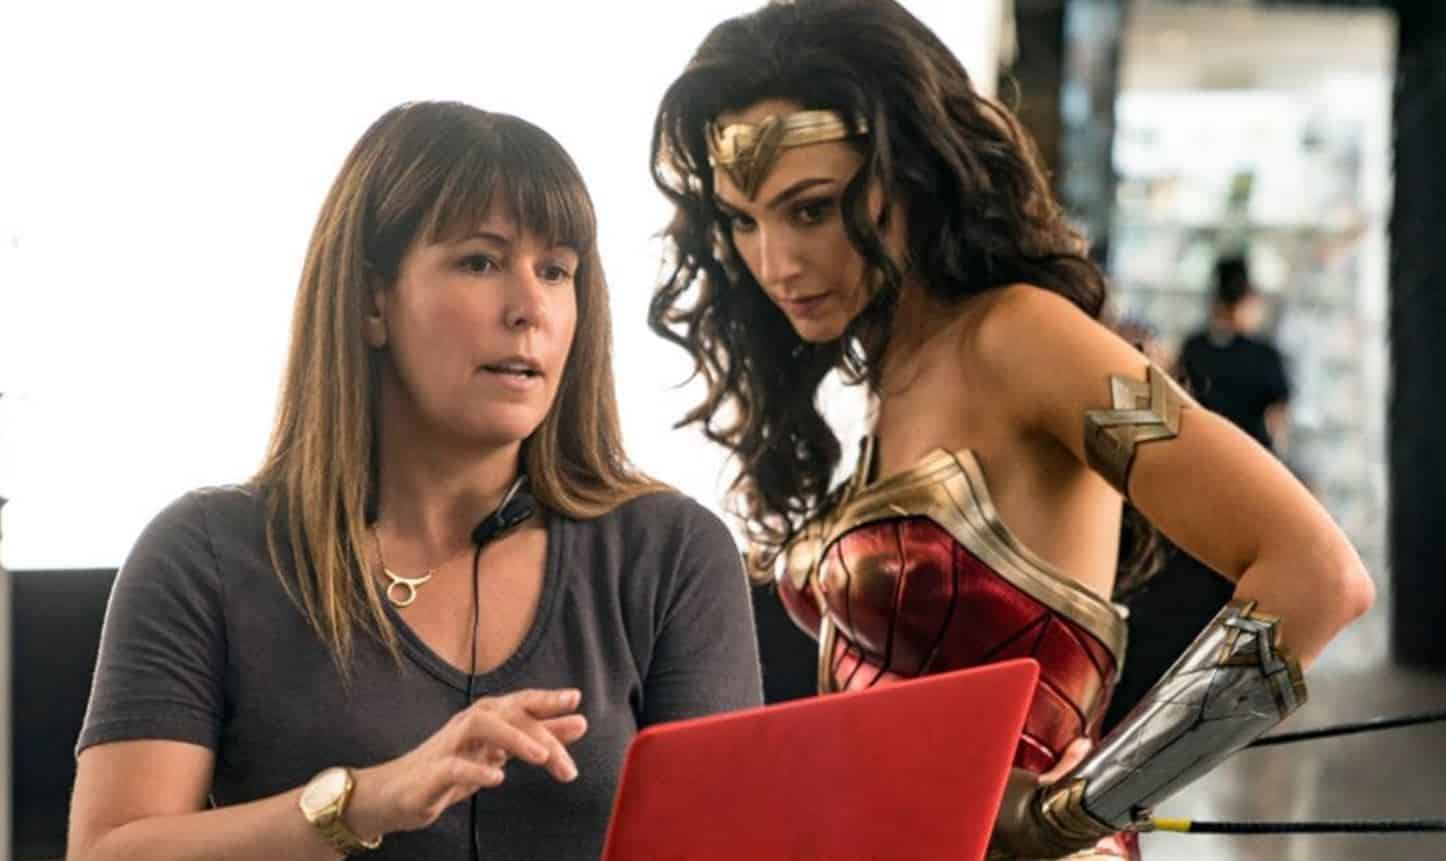 Wonder Woman III : What we know so far about the 3rd movie